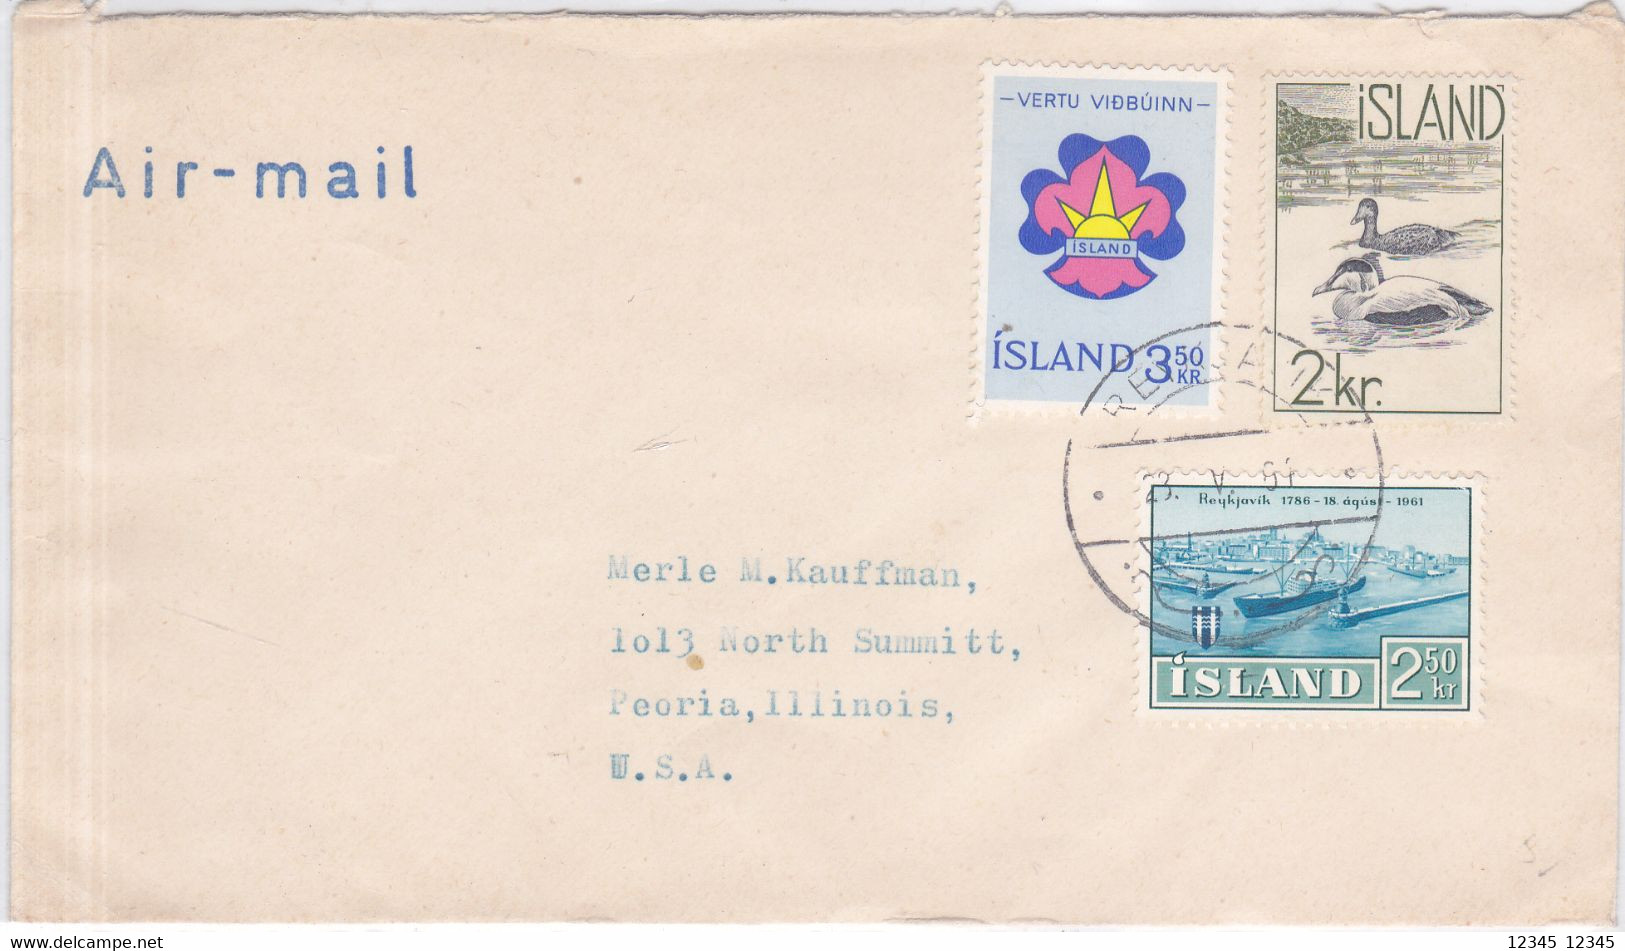 1961 Letter From Island To U.S.A. - Covers & Documents